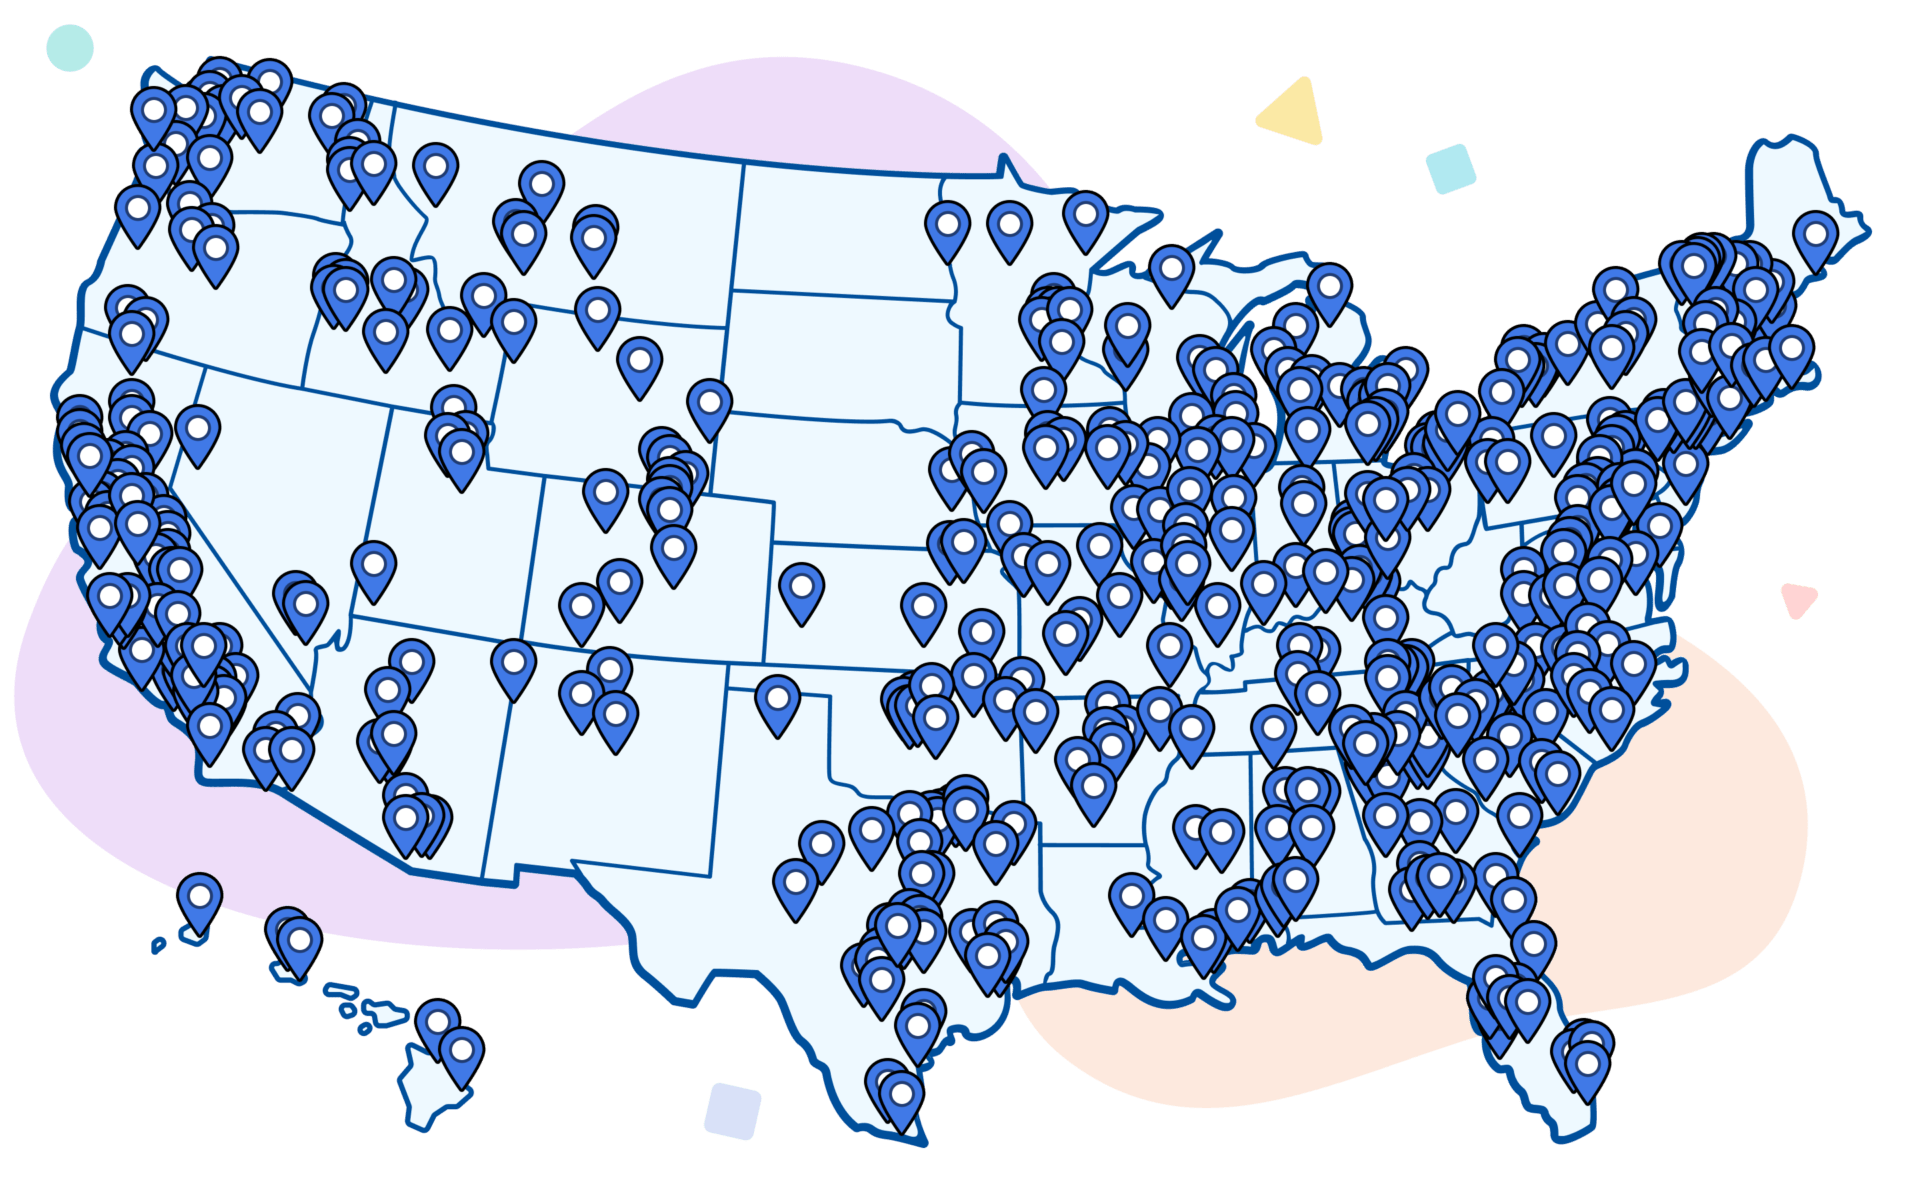 Map of the USA with marked locations across all states, illustrated in a clear vector style with blue pins and a multicolored background inspired by illustrative mathematics.